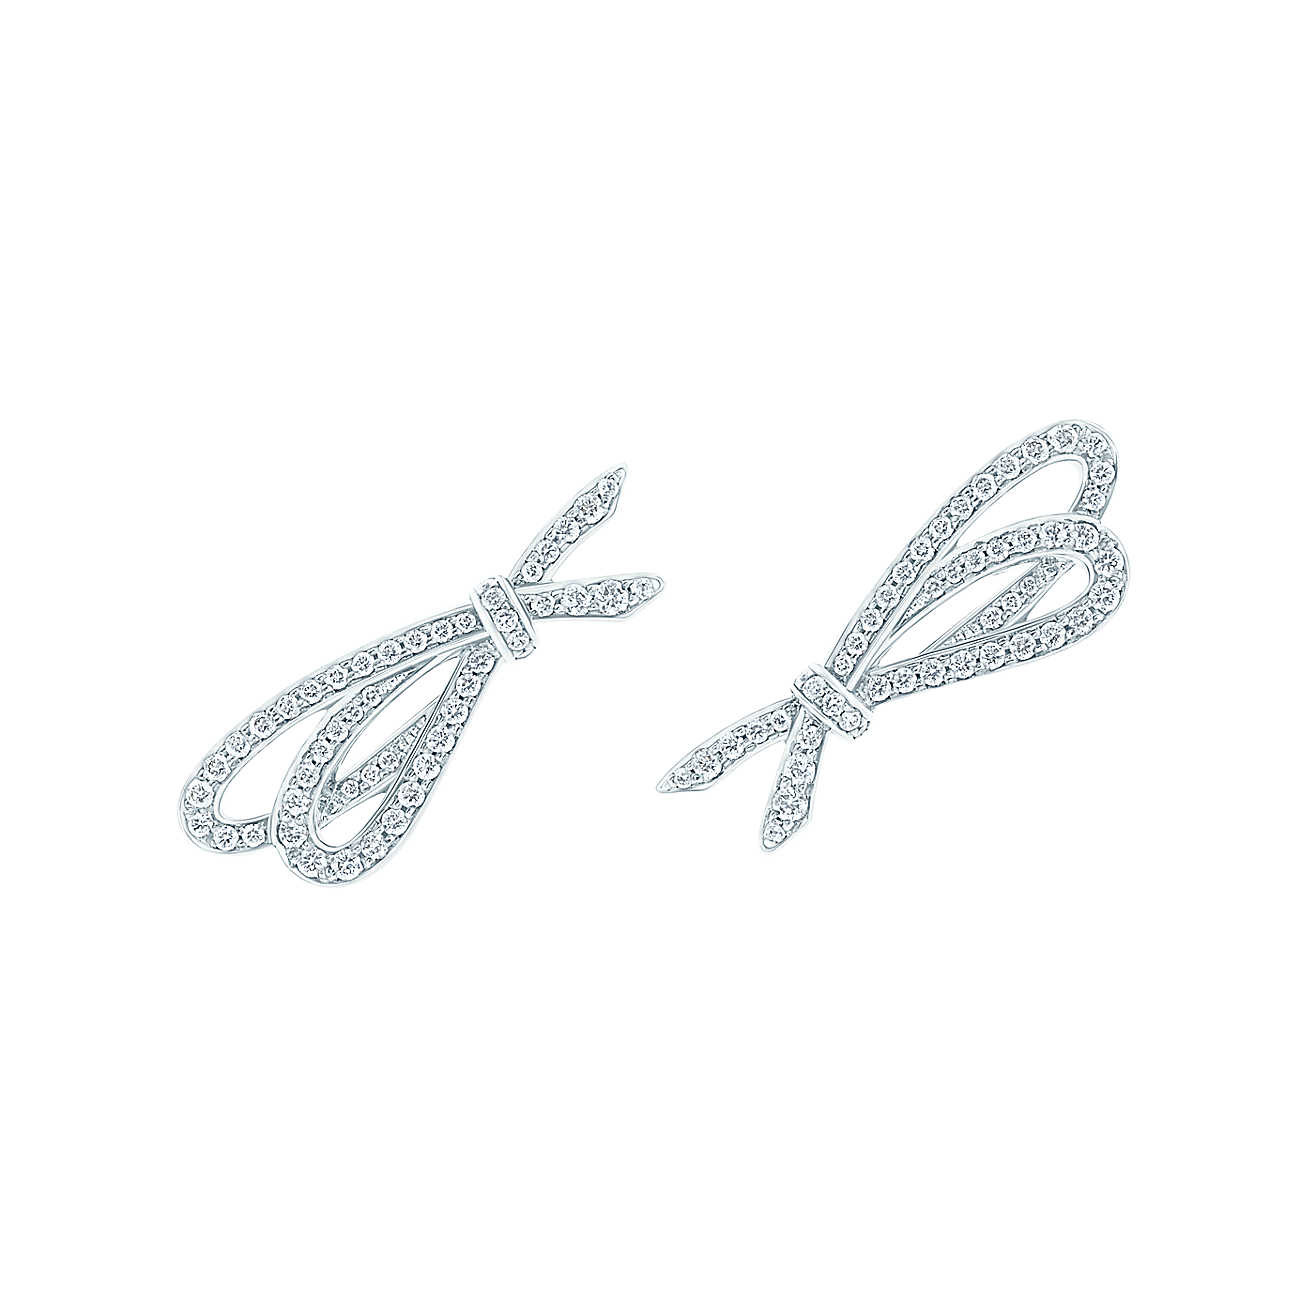 Tiffany Bow Earrings
 Tiffany Bow earrings in 18k white gold with diamonds